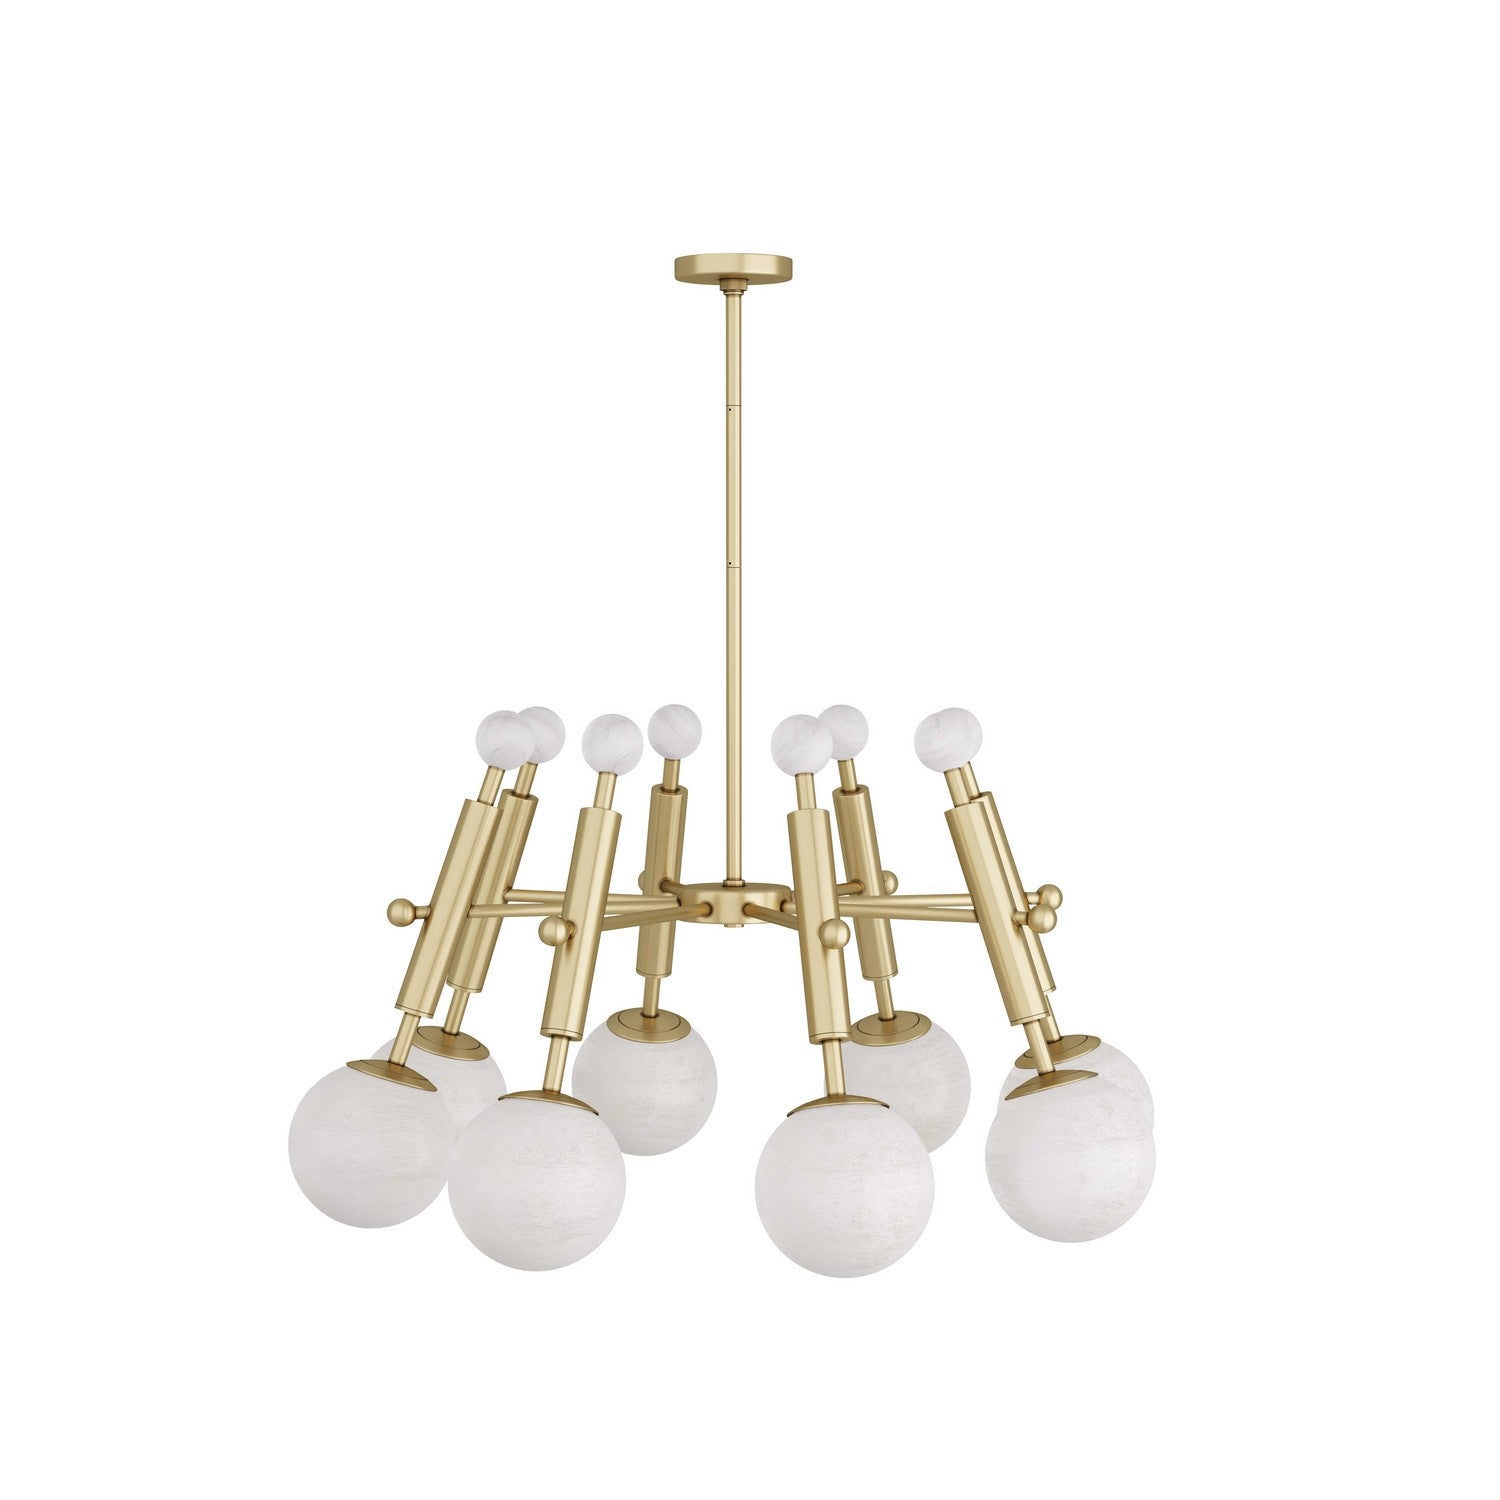 Eight Light Chandelier from the Verona collection in Antique Brass finish